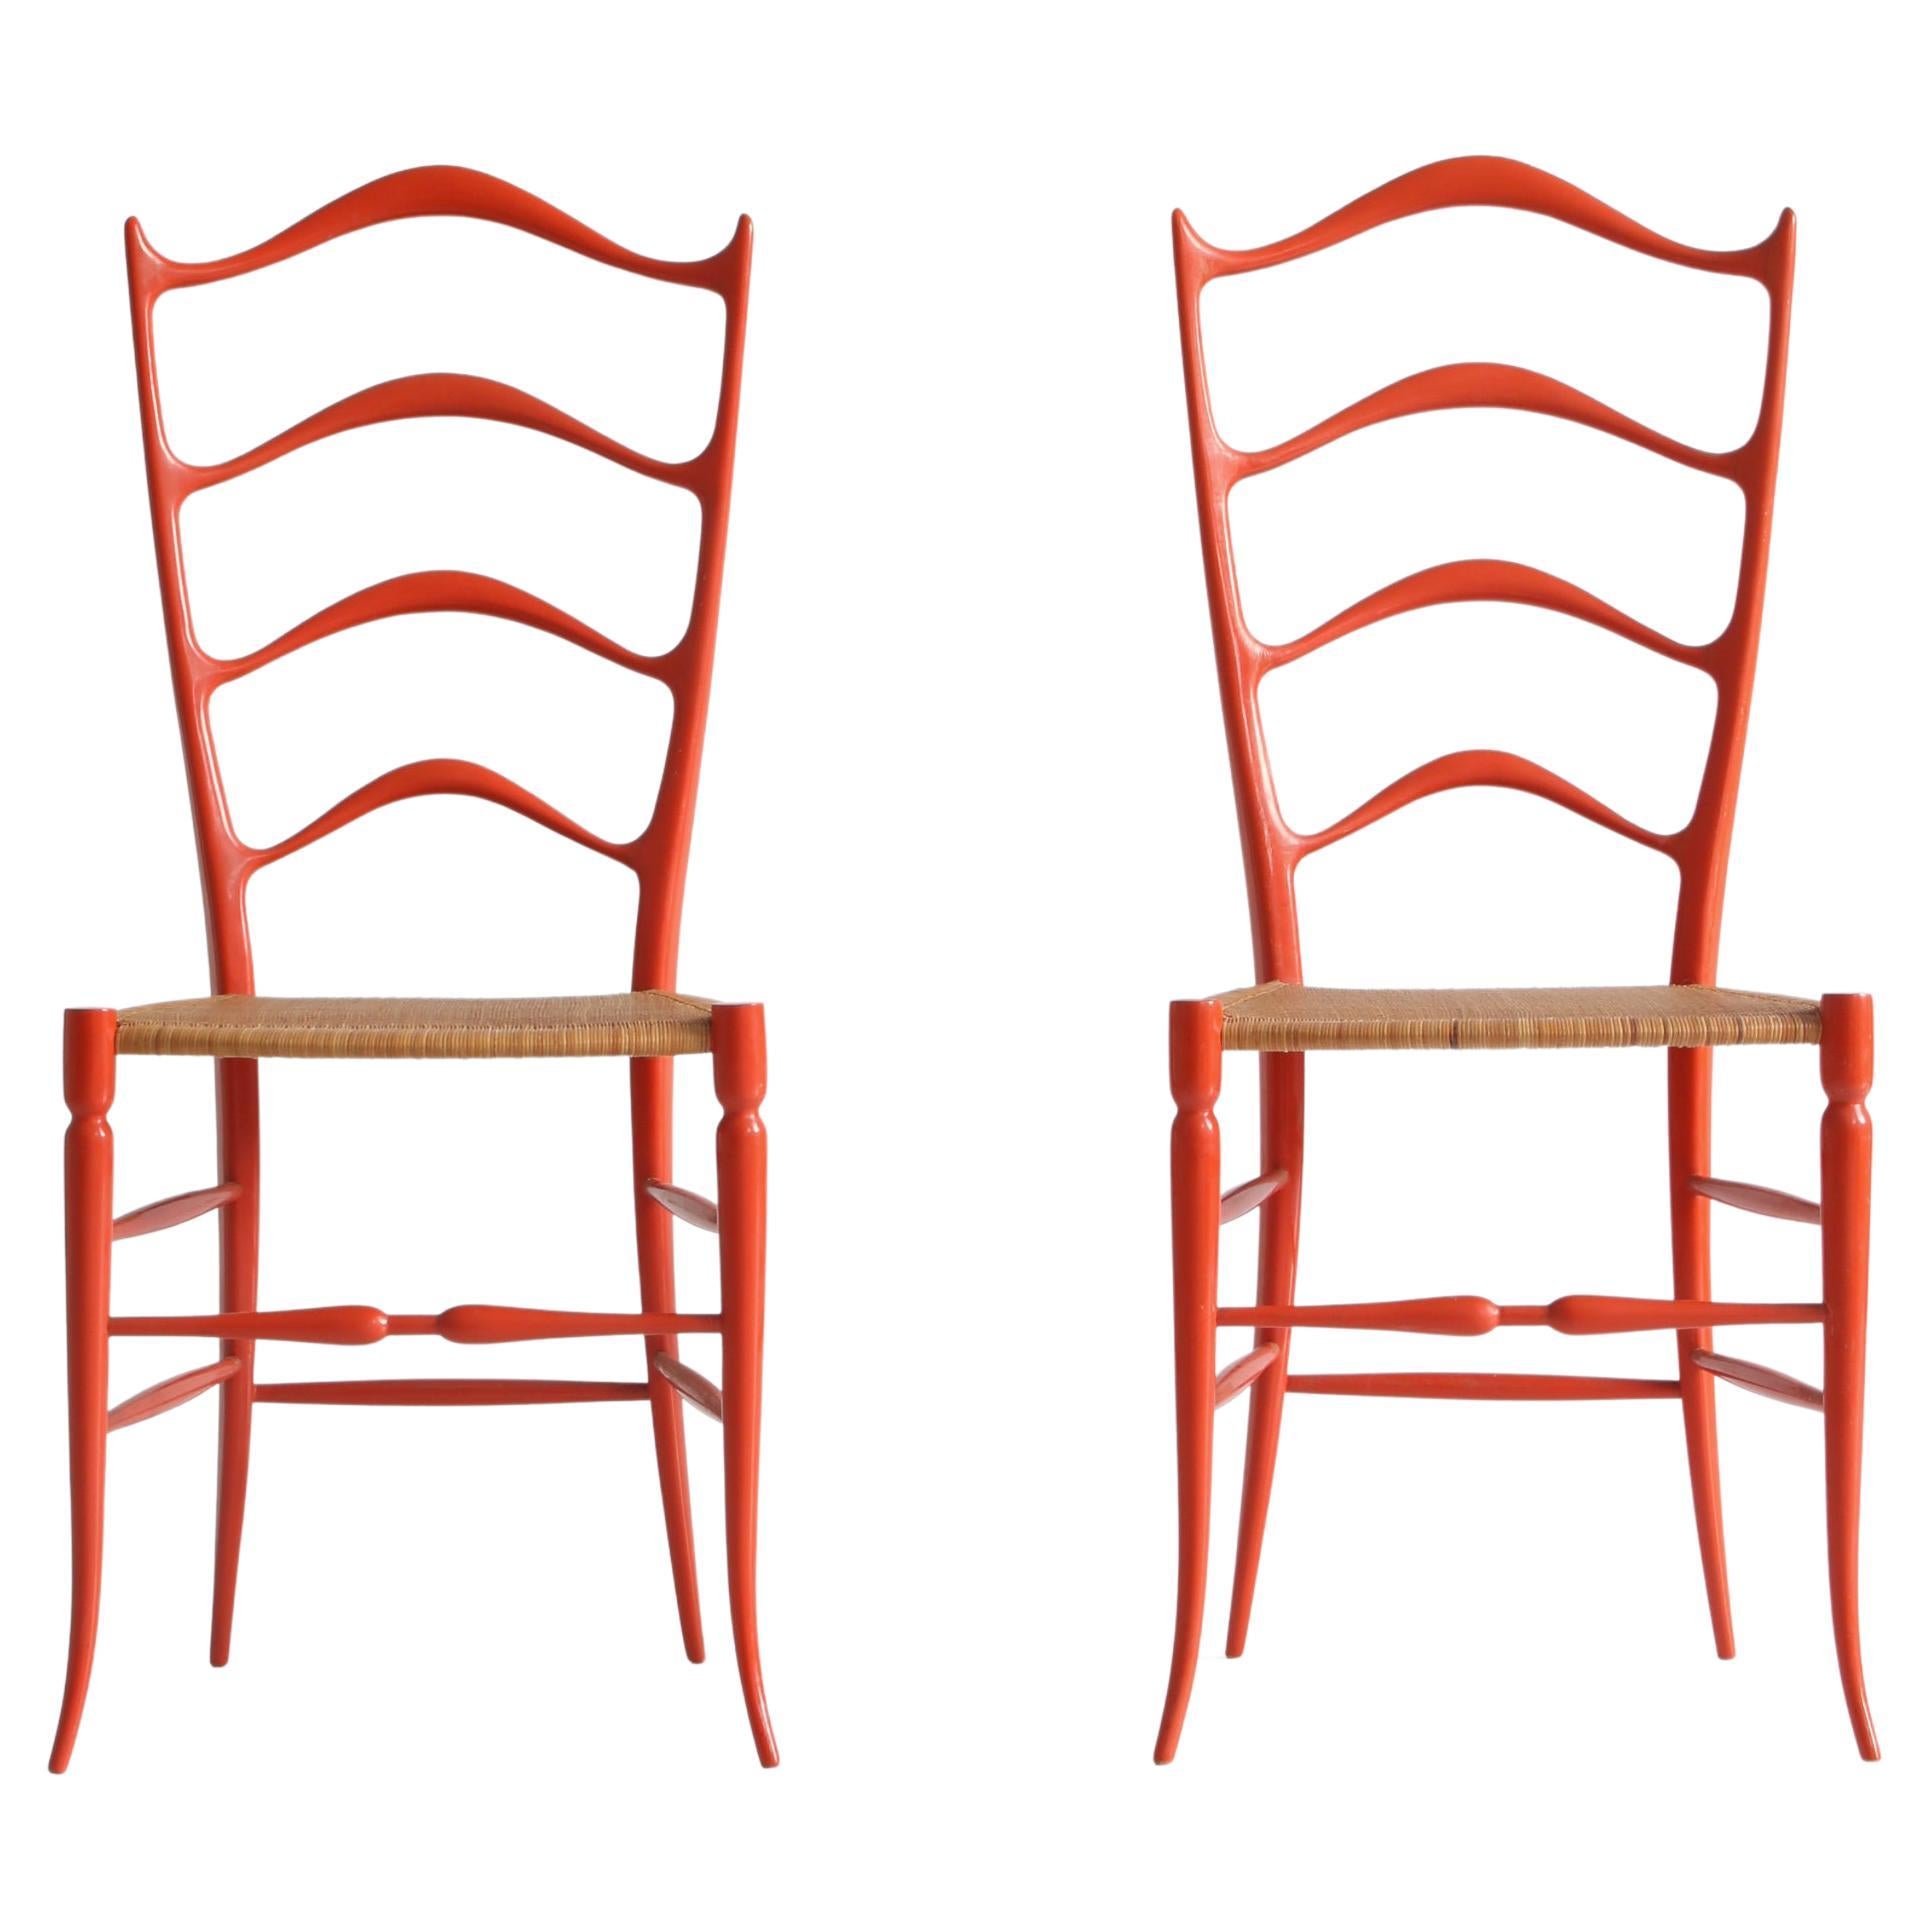 Set of 1950s Gio Ponti Ladderback Chairs "Ferrante" by A. Bulleri & Co, Italy